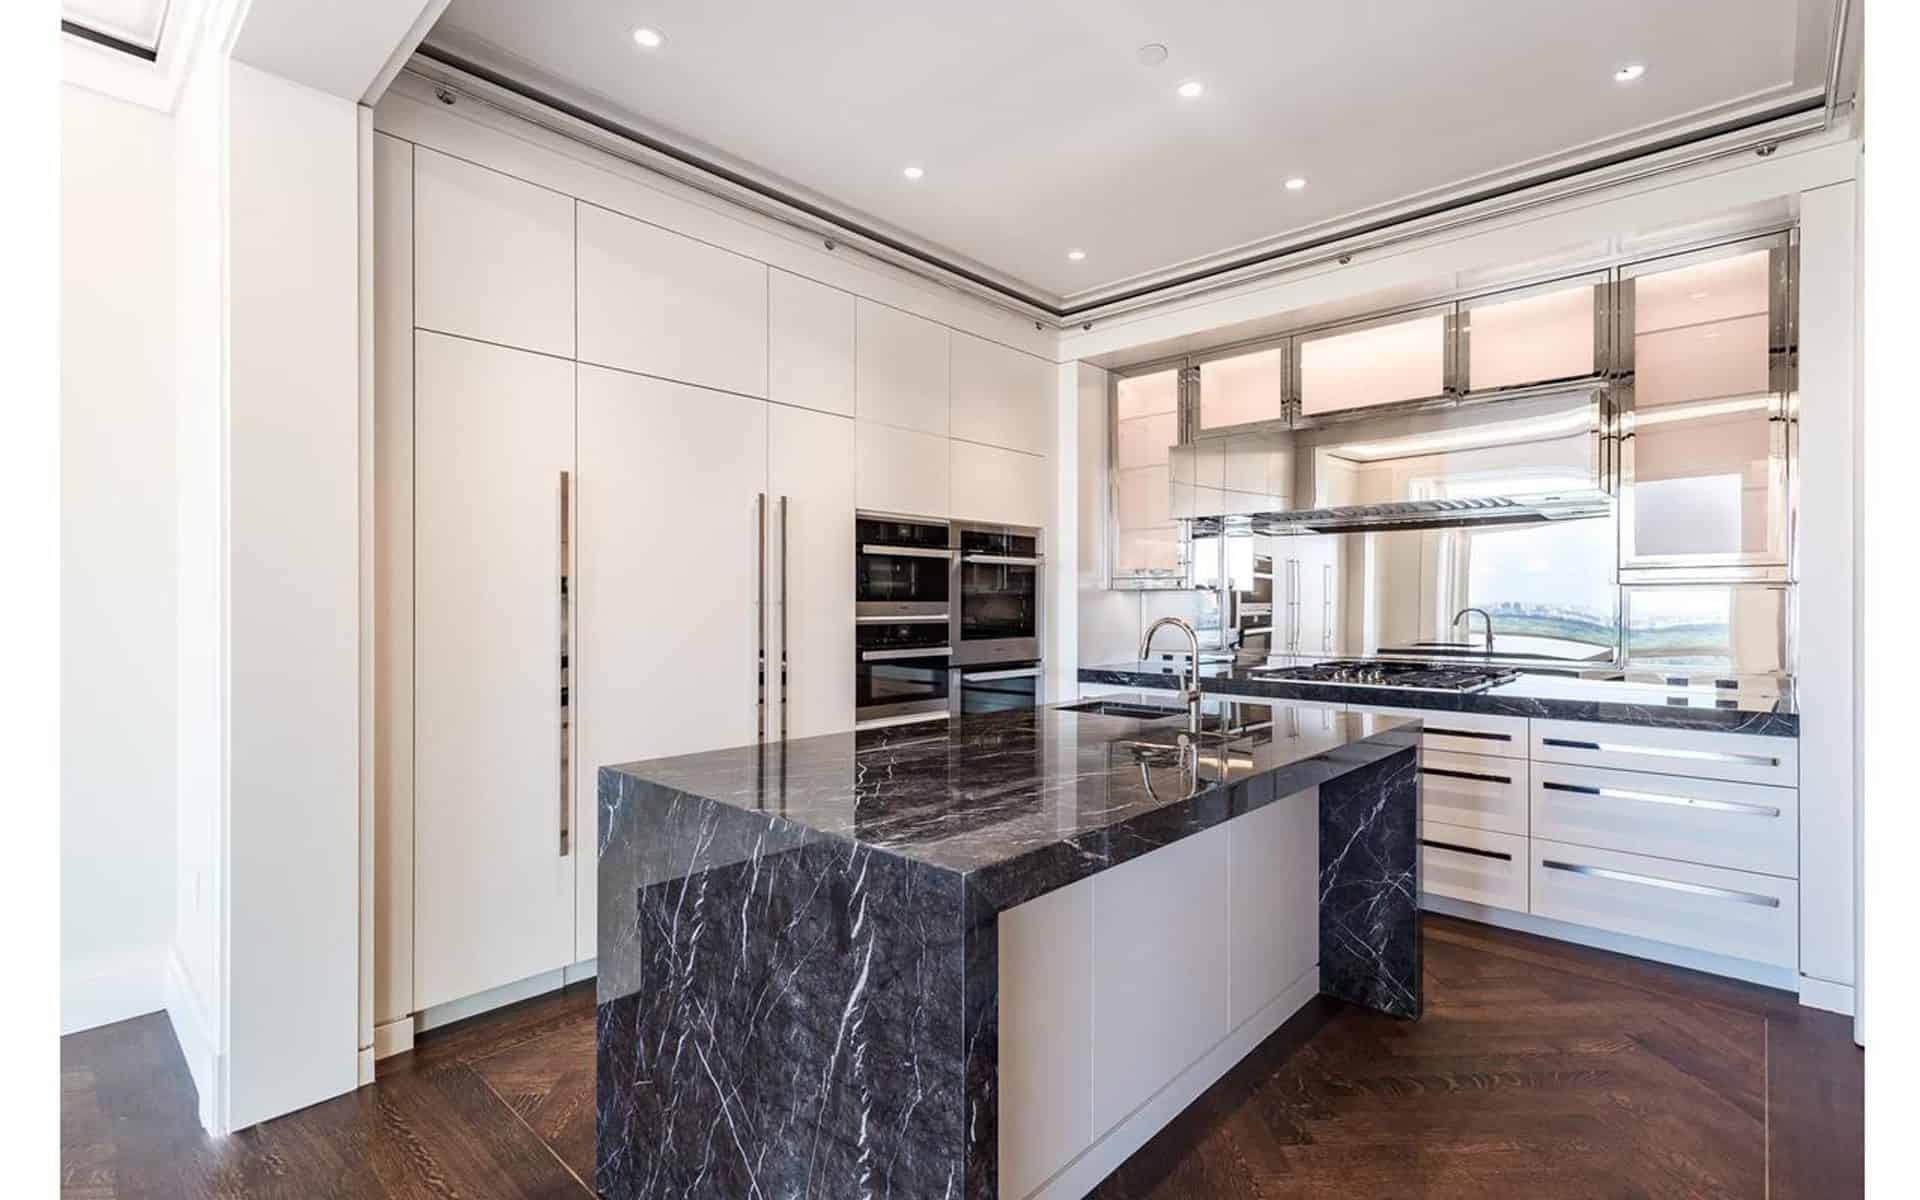 Custom kitchen with dramatic waterfall island, white custom cabinets and chrome accents.